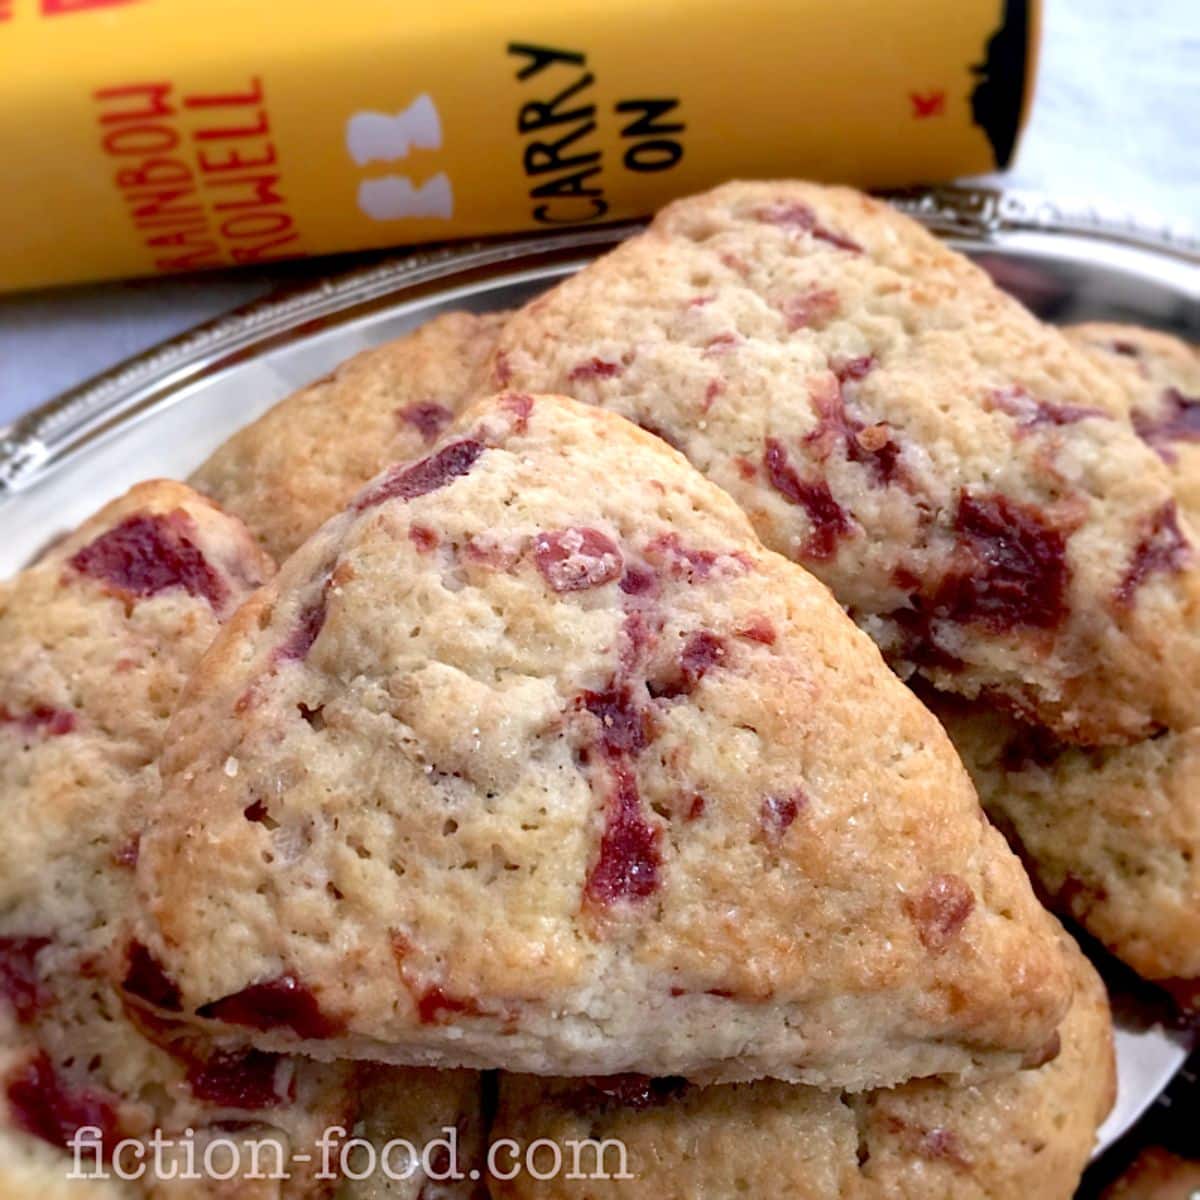 Delicious sour cherry scones on a metal tray.